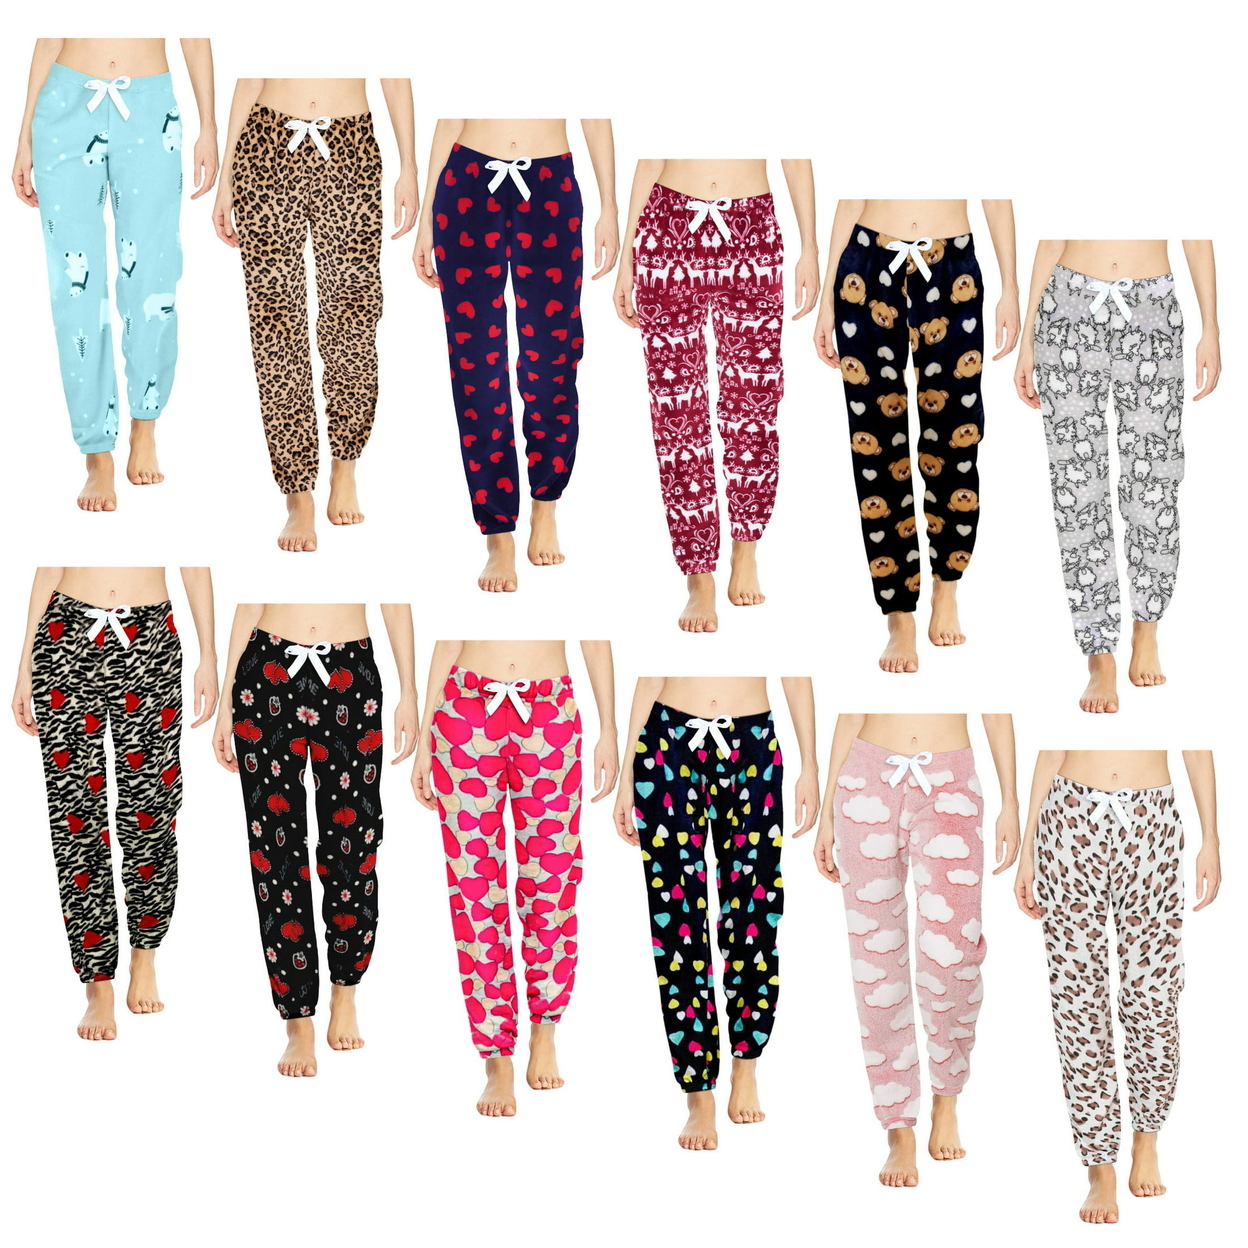 Multi-Pack: Women's Printed Ultra-Soft Comfy Stretch Micro-Fleece Pajama Lounge Pants - 1-pack, Shapes, X-large